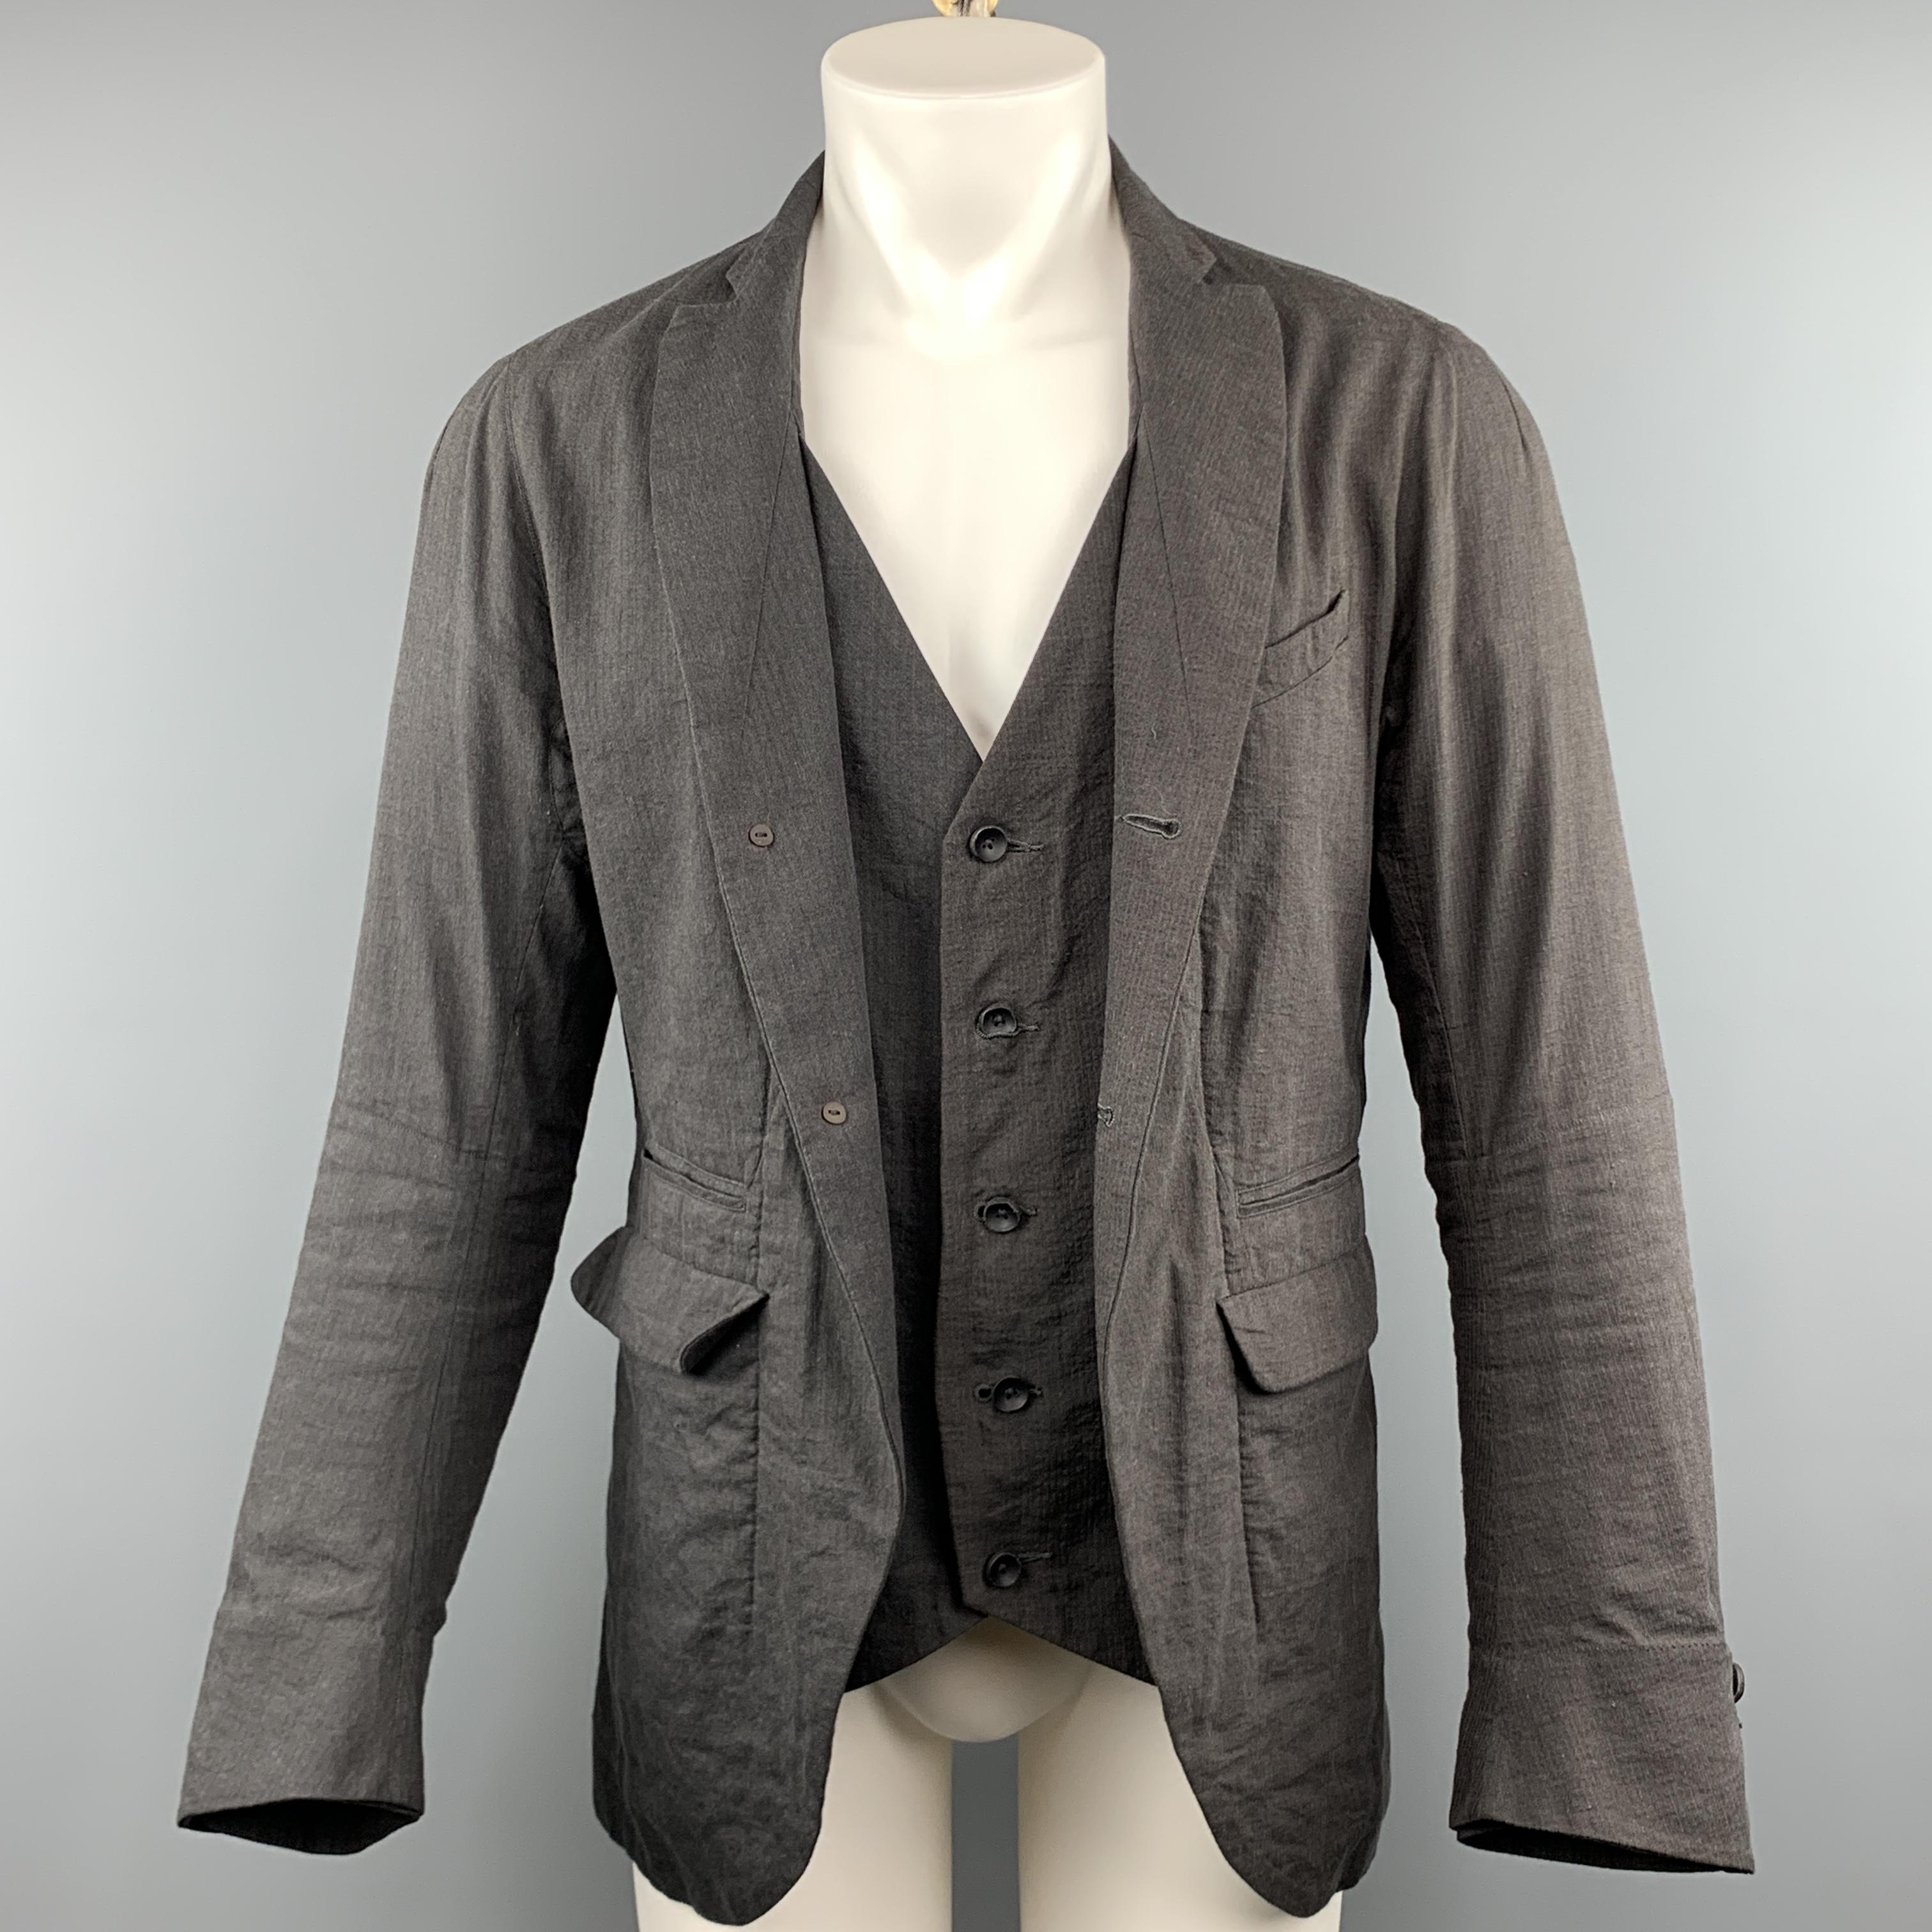 ZIGGY CHEN jacket comes in a charcoal textured cotton and linen featuring a notch lapel style, simulated vest layer, flap pockets, and a buttoned closure.
 
Very Good Pre-Owned Condition.
Marked: 48
 
Measurements:
 
Shoulder: 17.5 in.
Chest: 38